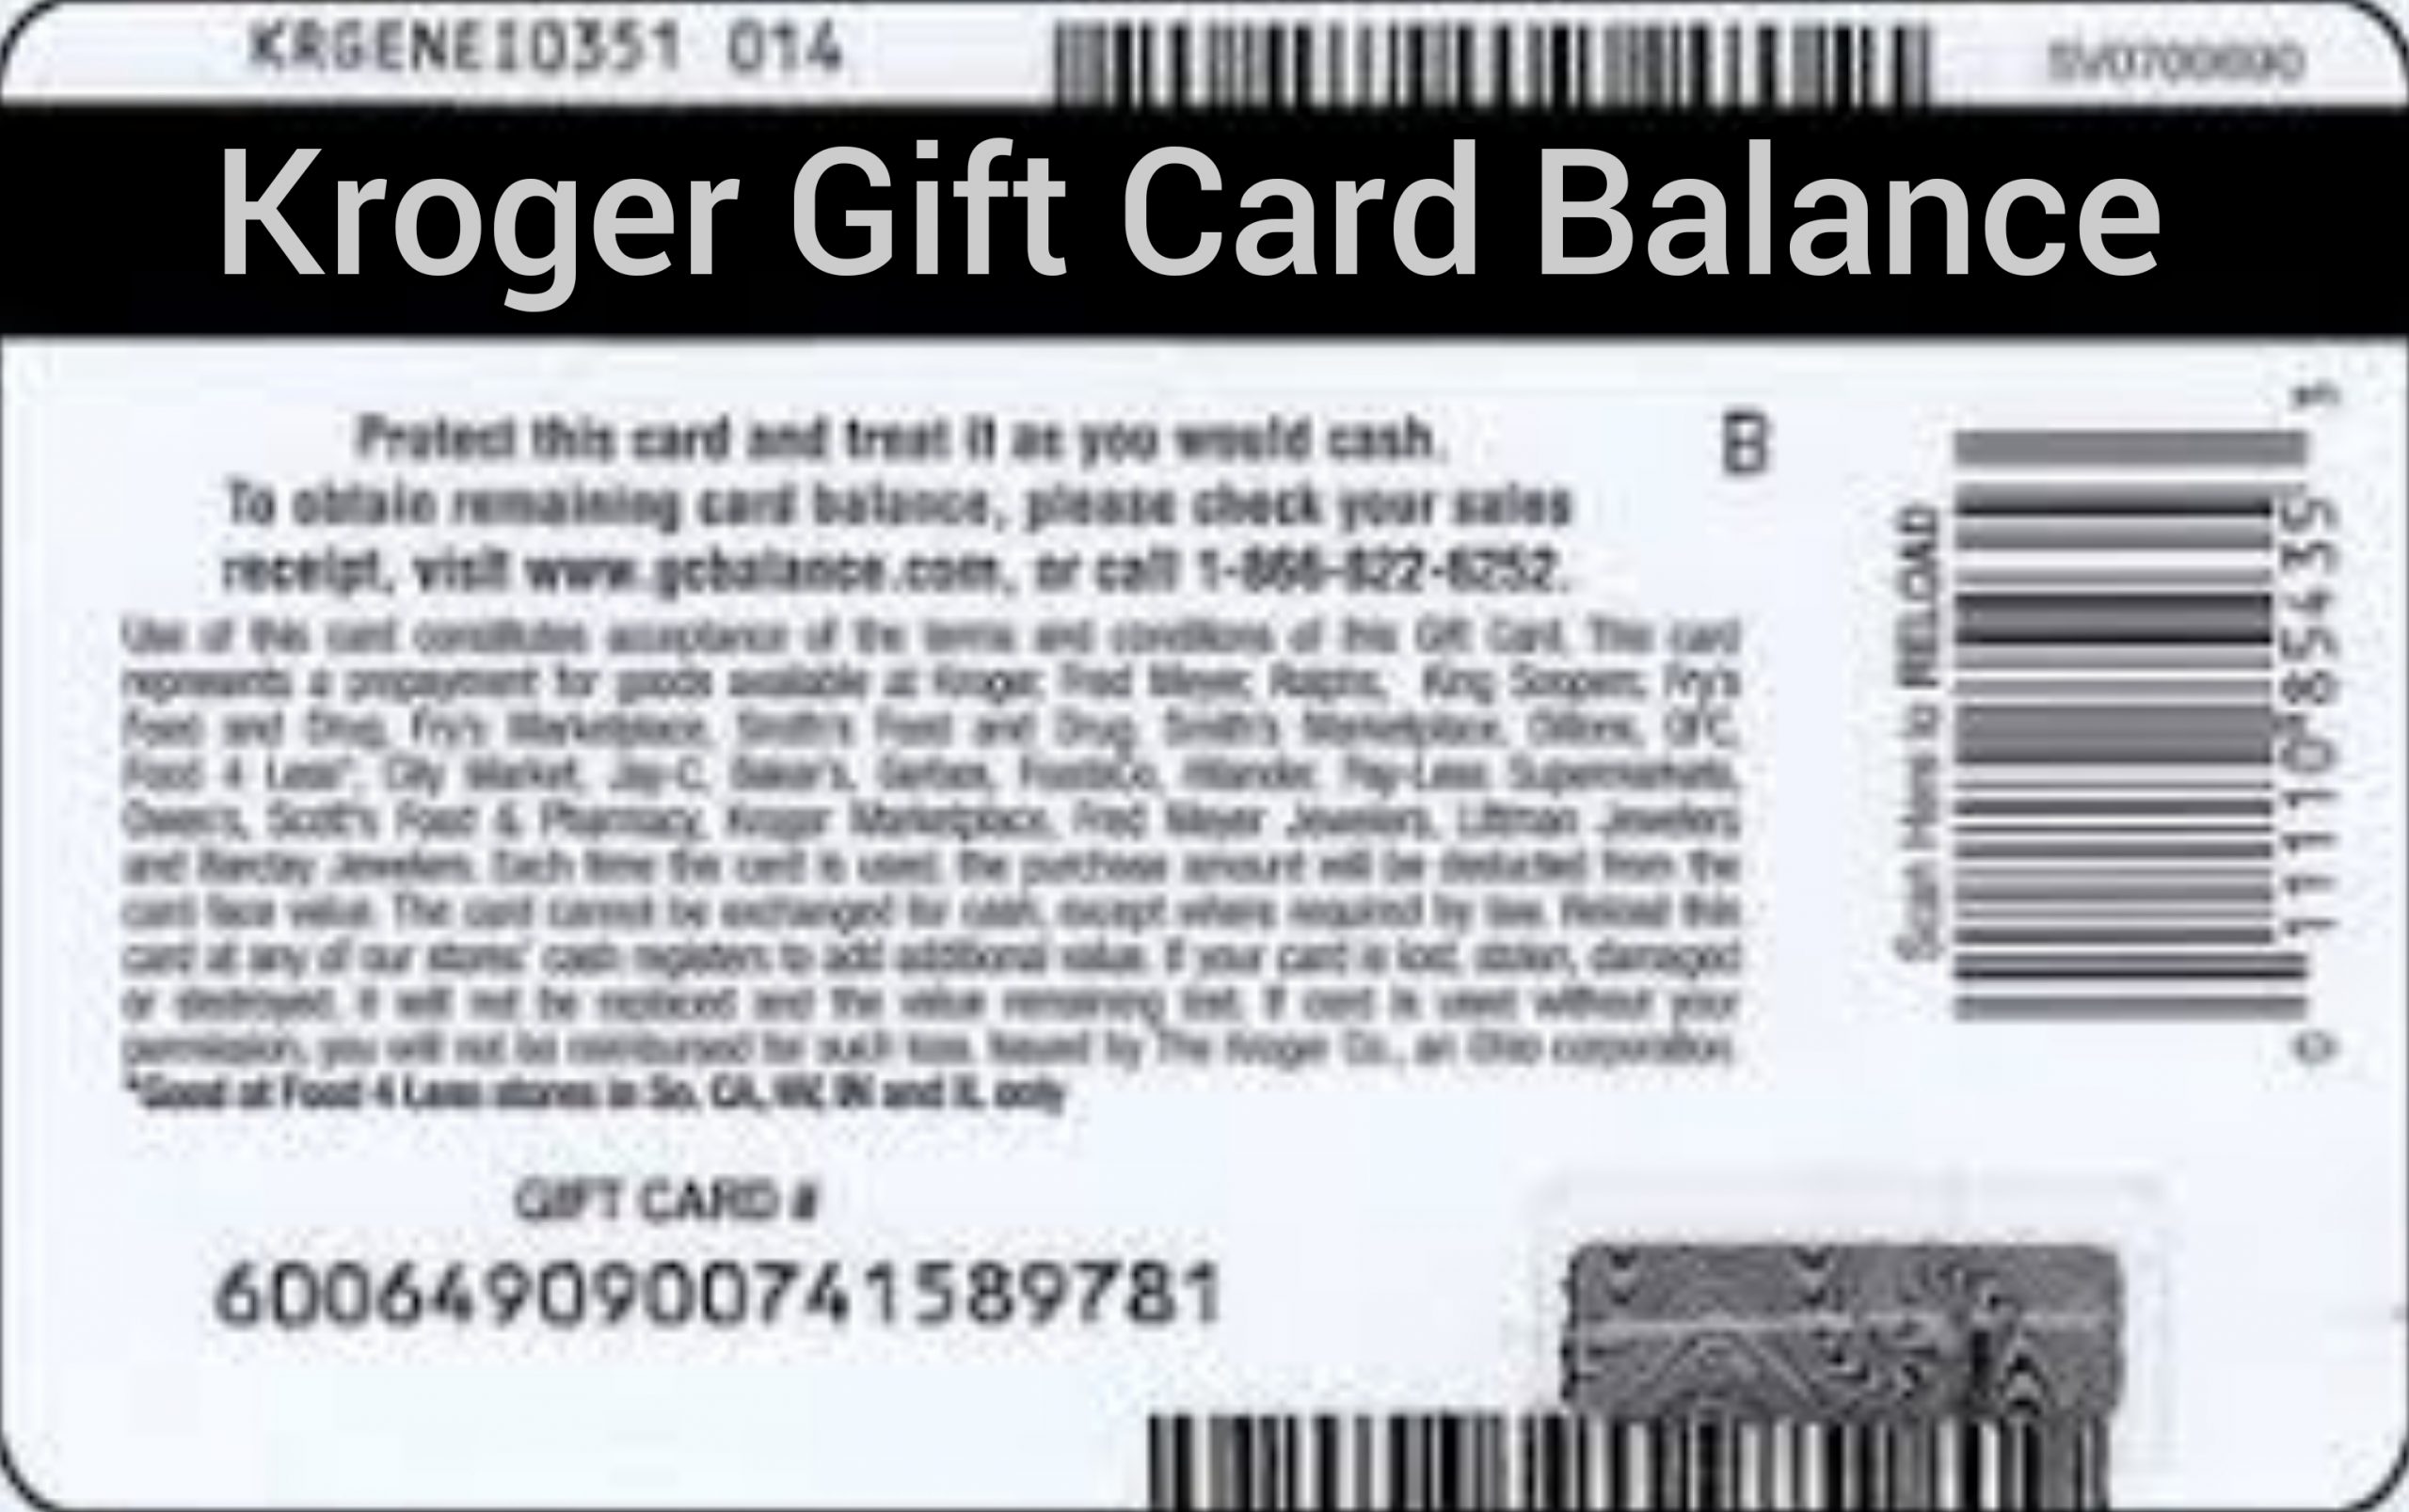 Kroger Gift Card Balance Check - How To Check Your Kroger Gift Card Balance